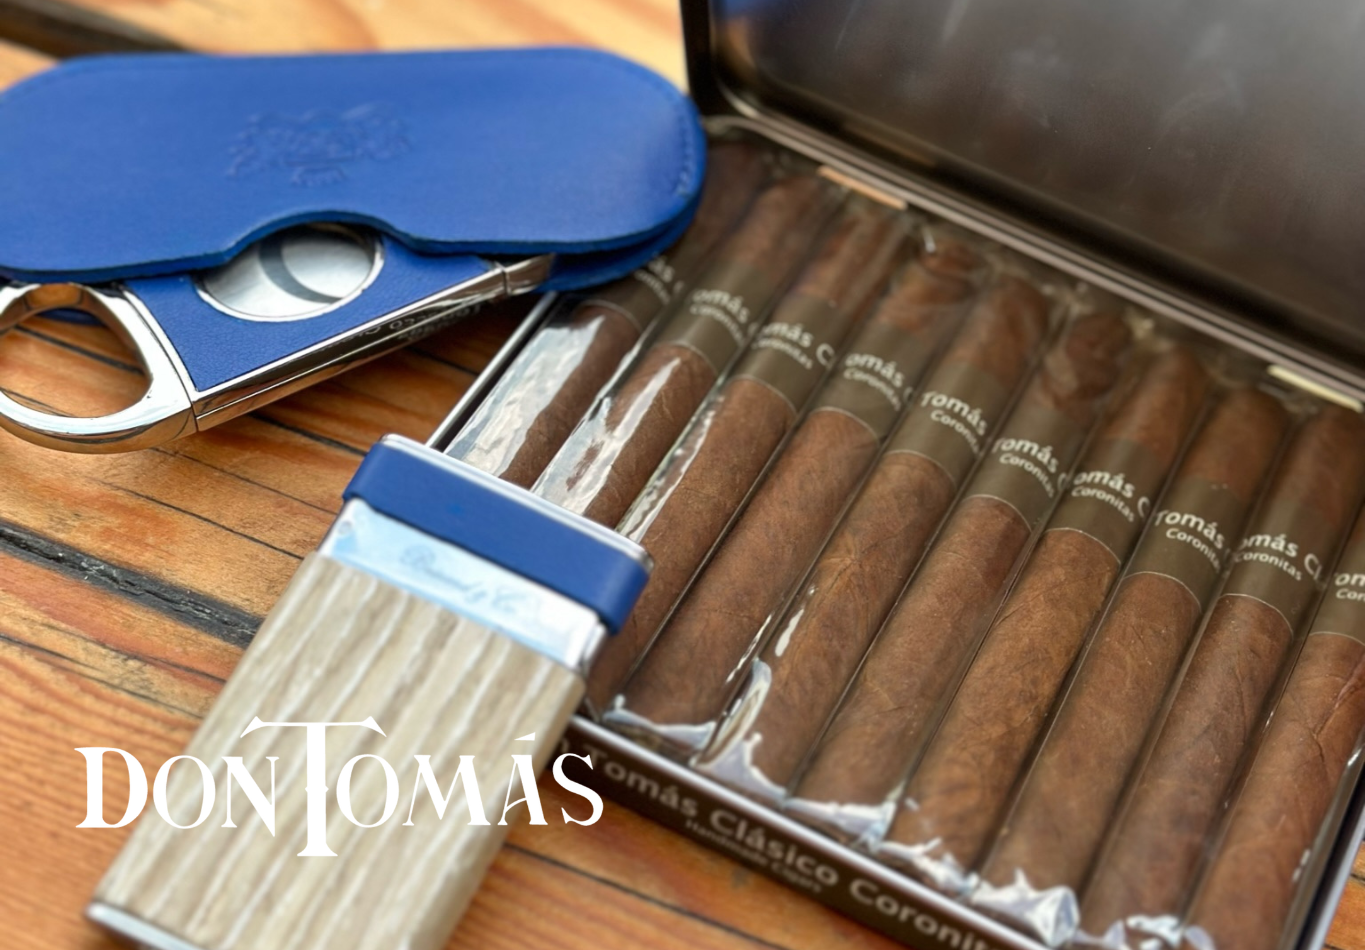 Embracing Tradition with Don Tomas Cigars